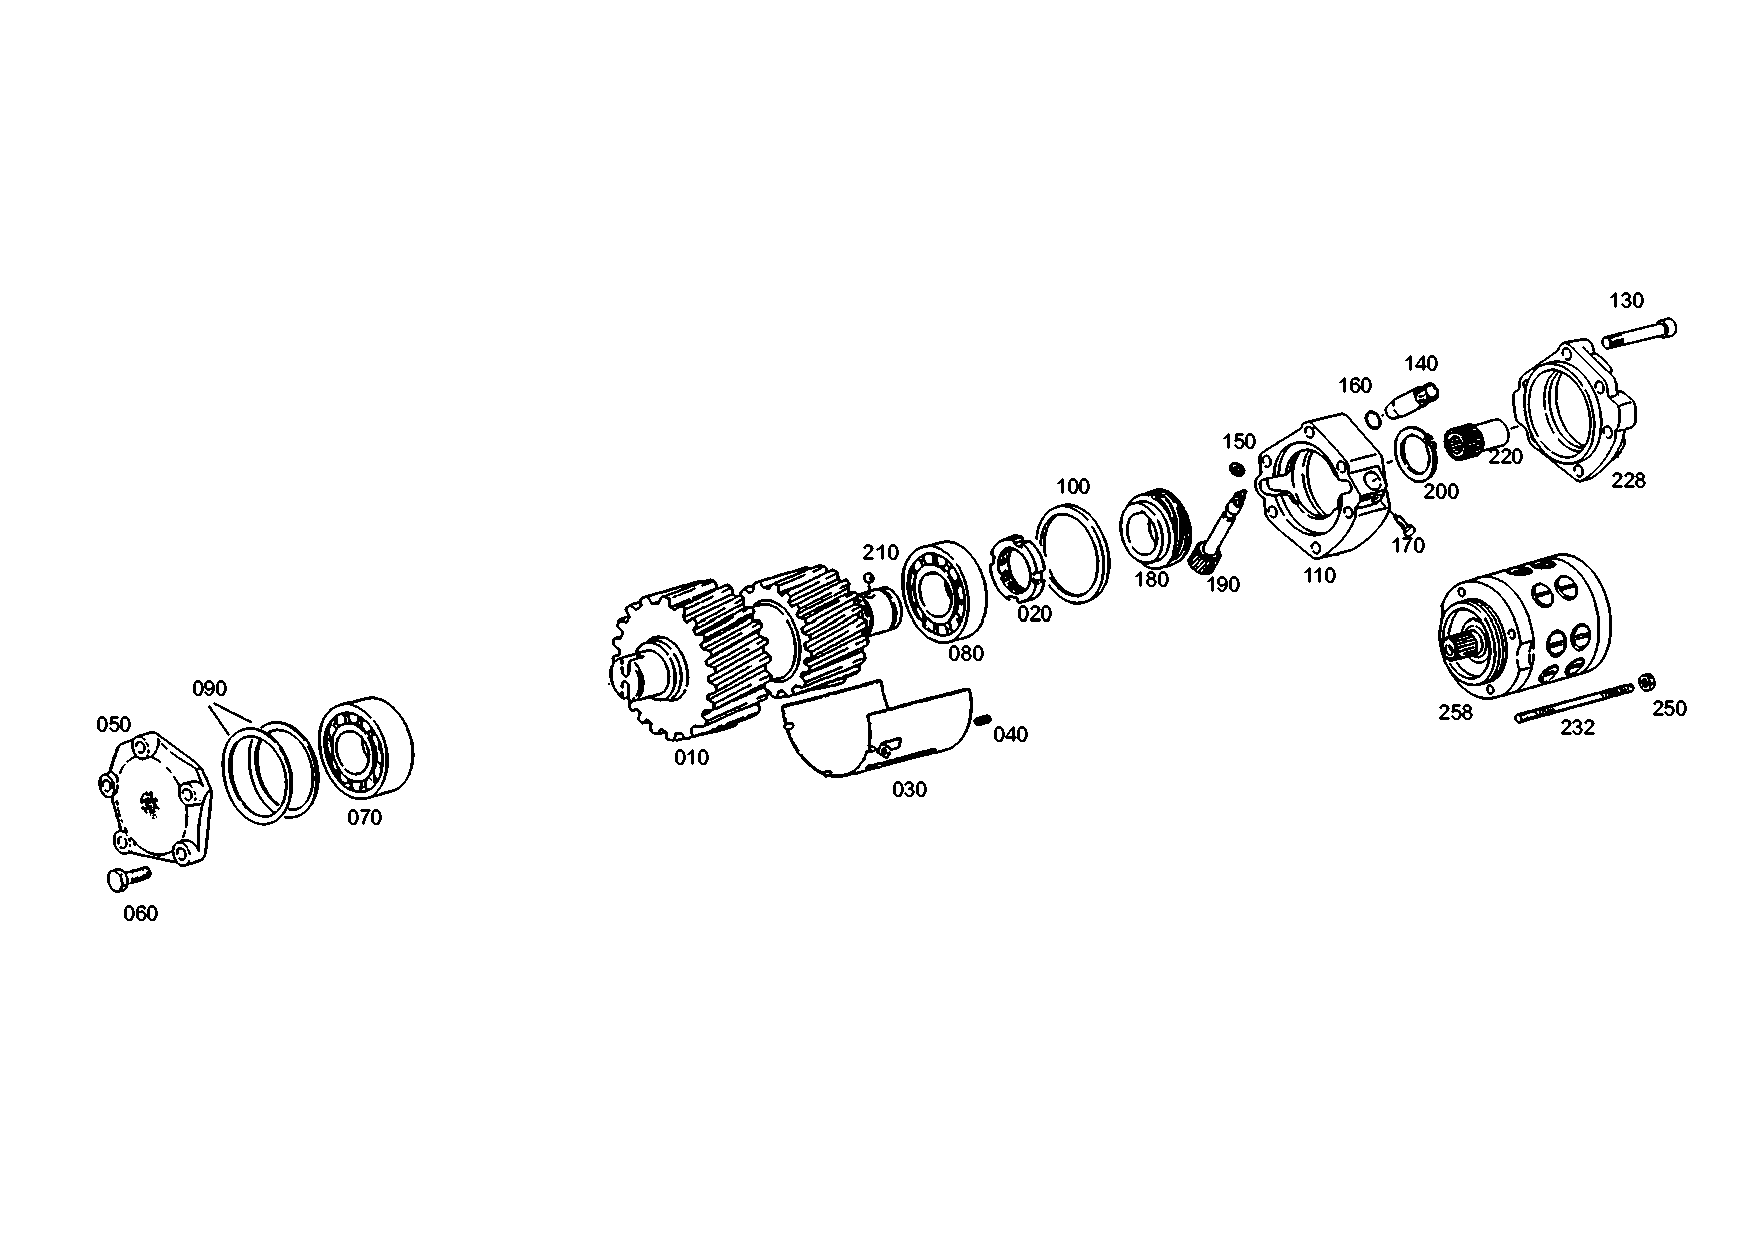 drawing for LUNA EQUIPOS INDUSTRIEALES, S.A. 199118250233 - INPUT GEAR (figure 3)